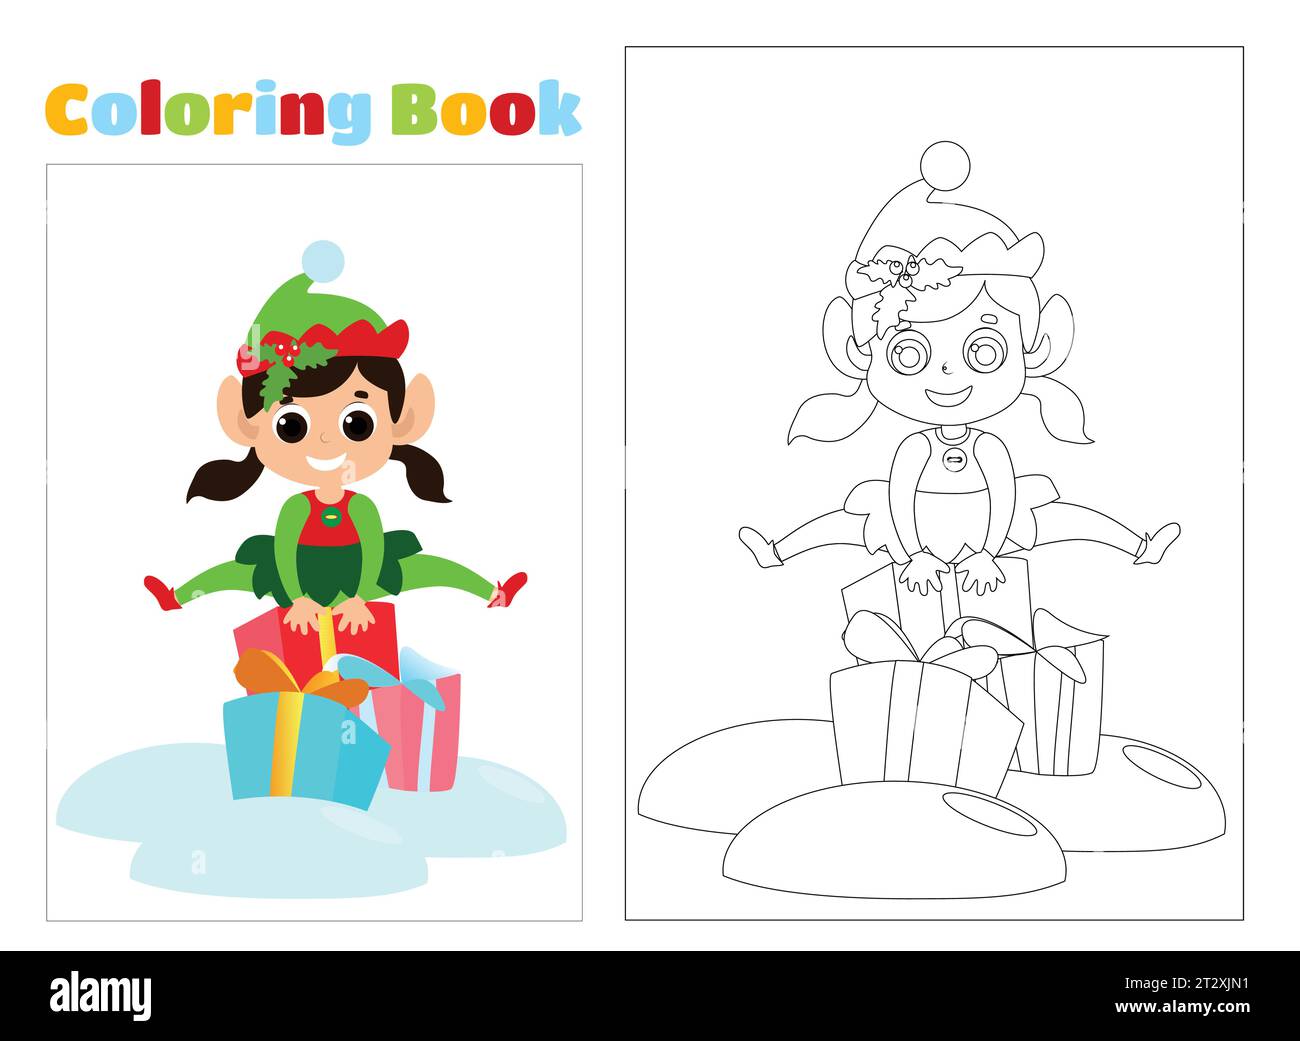 Coloring page. Little elf girl jumps over gift boxes. The child is happy and dressed in a traditional elf costume. She has a cute face and happy eyes. Stock Vector